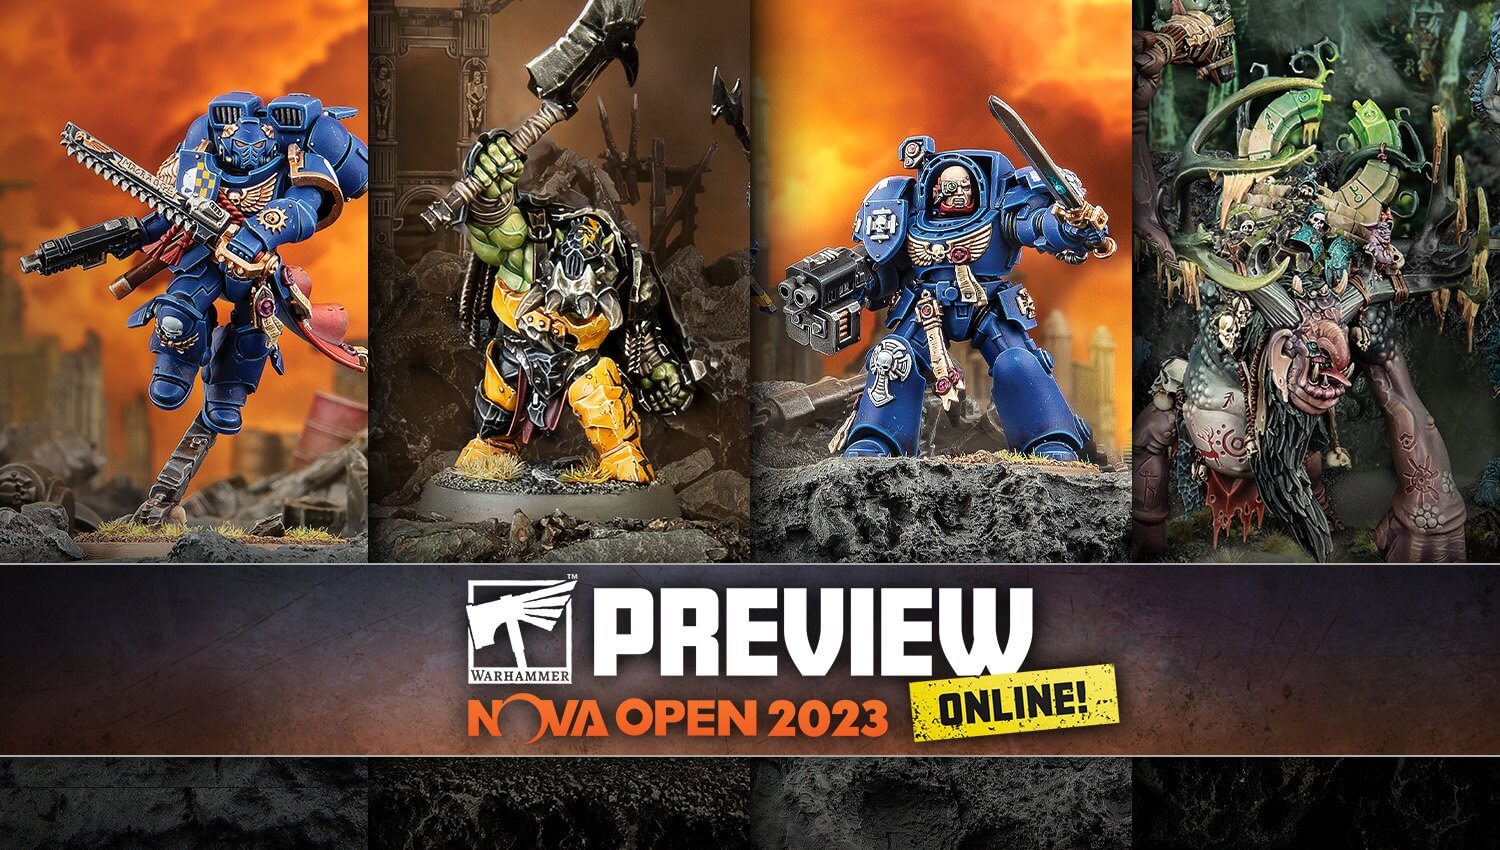 NOVA Open 2023 Preview banner containing a picture of jet pack assault marines, Ironjaw, terminator character and Trogg